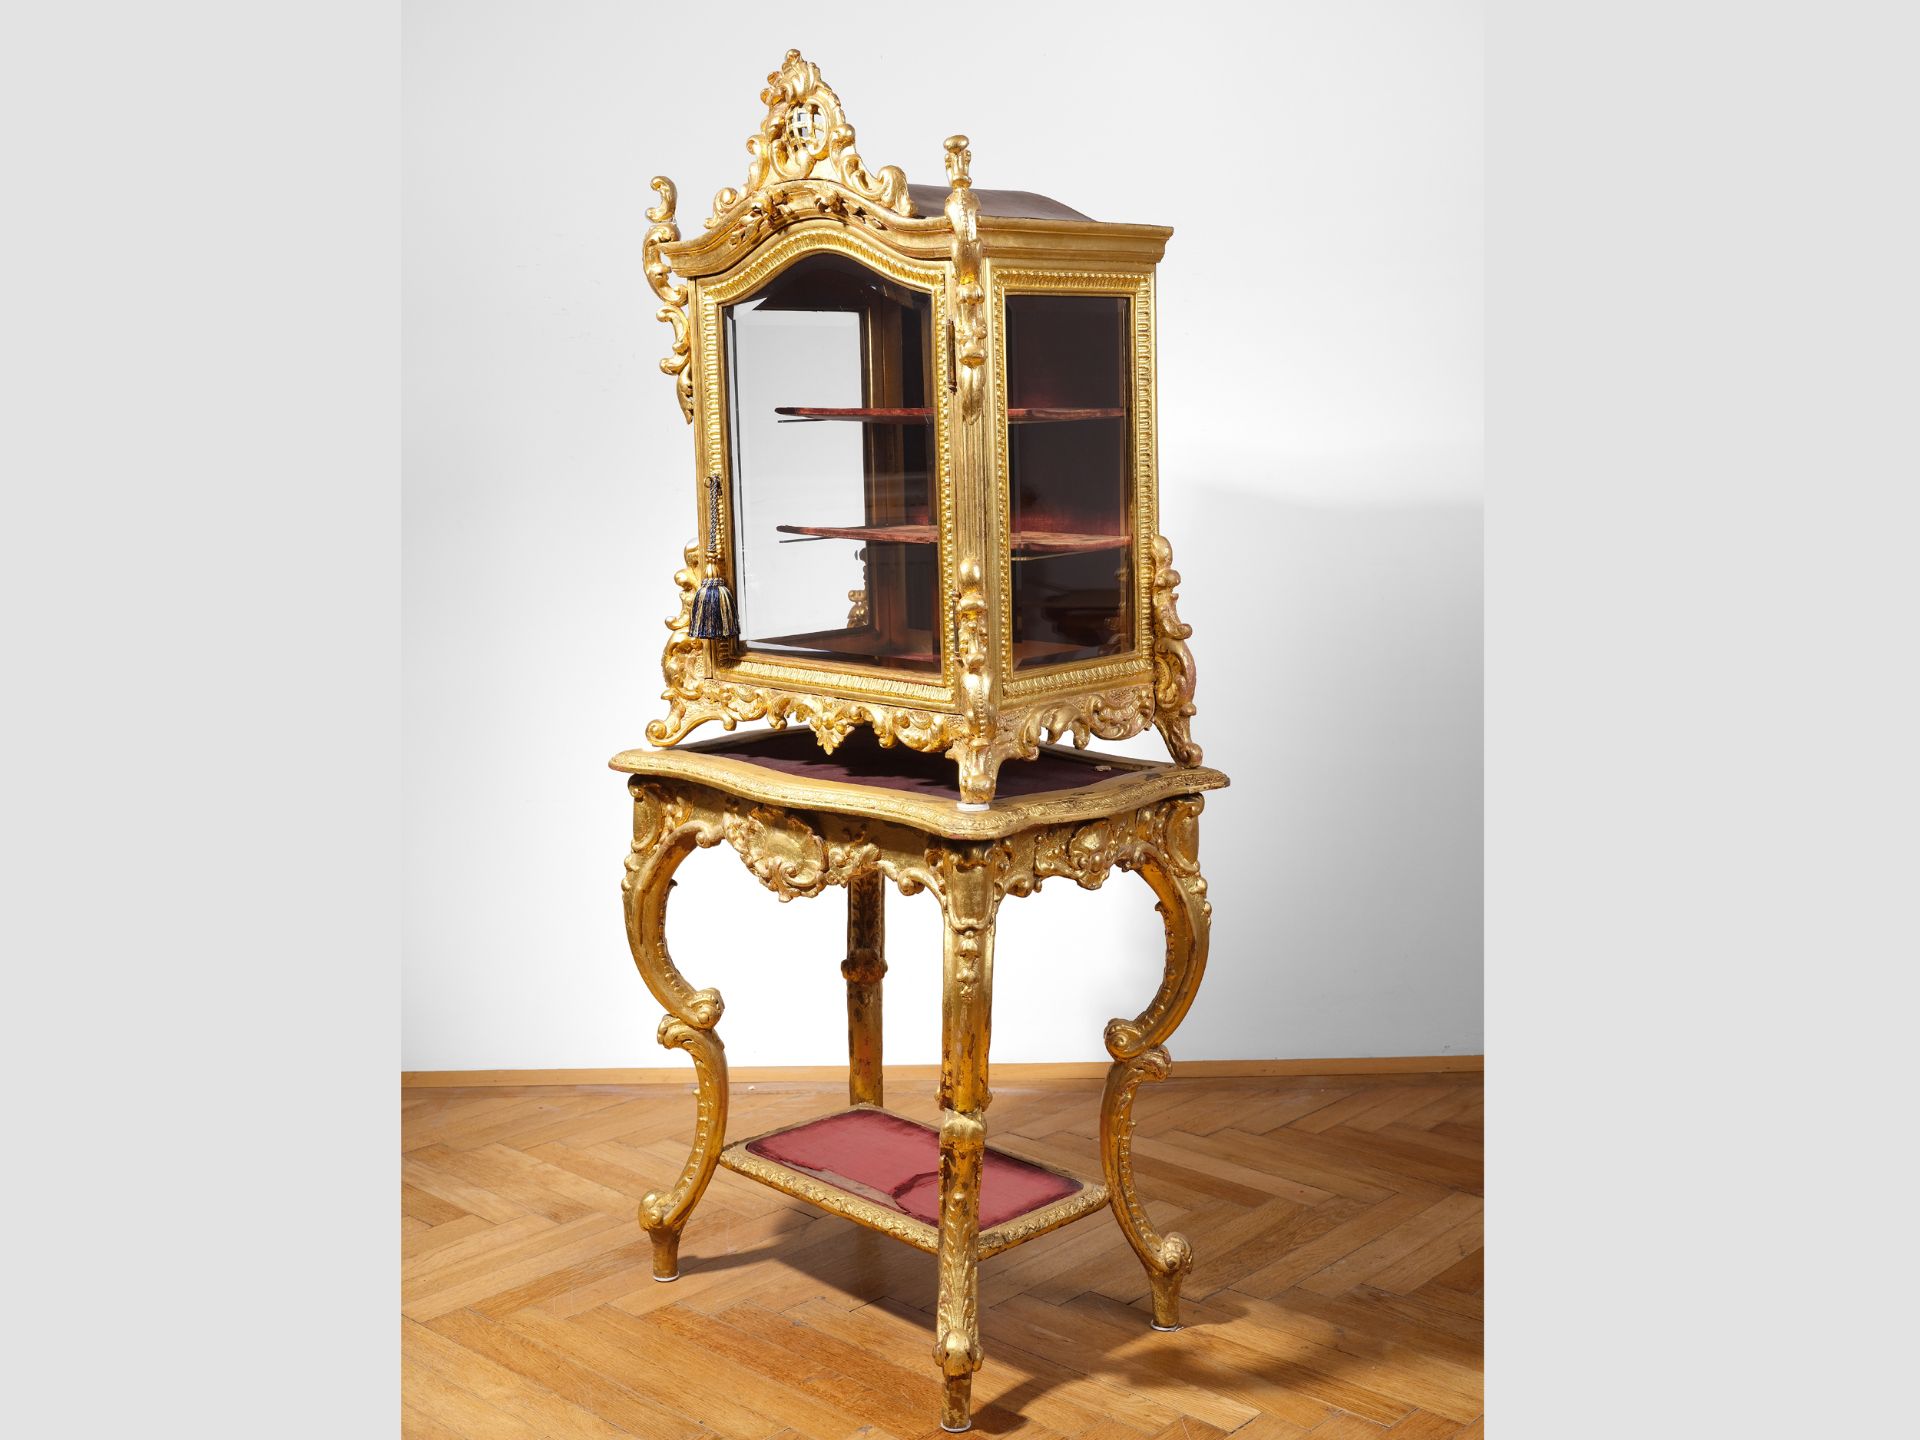 Neo-Rococo state display cabinet, Germany, Around 1860/70 - Image 2 of 5